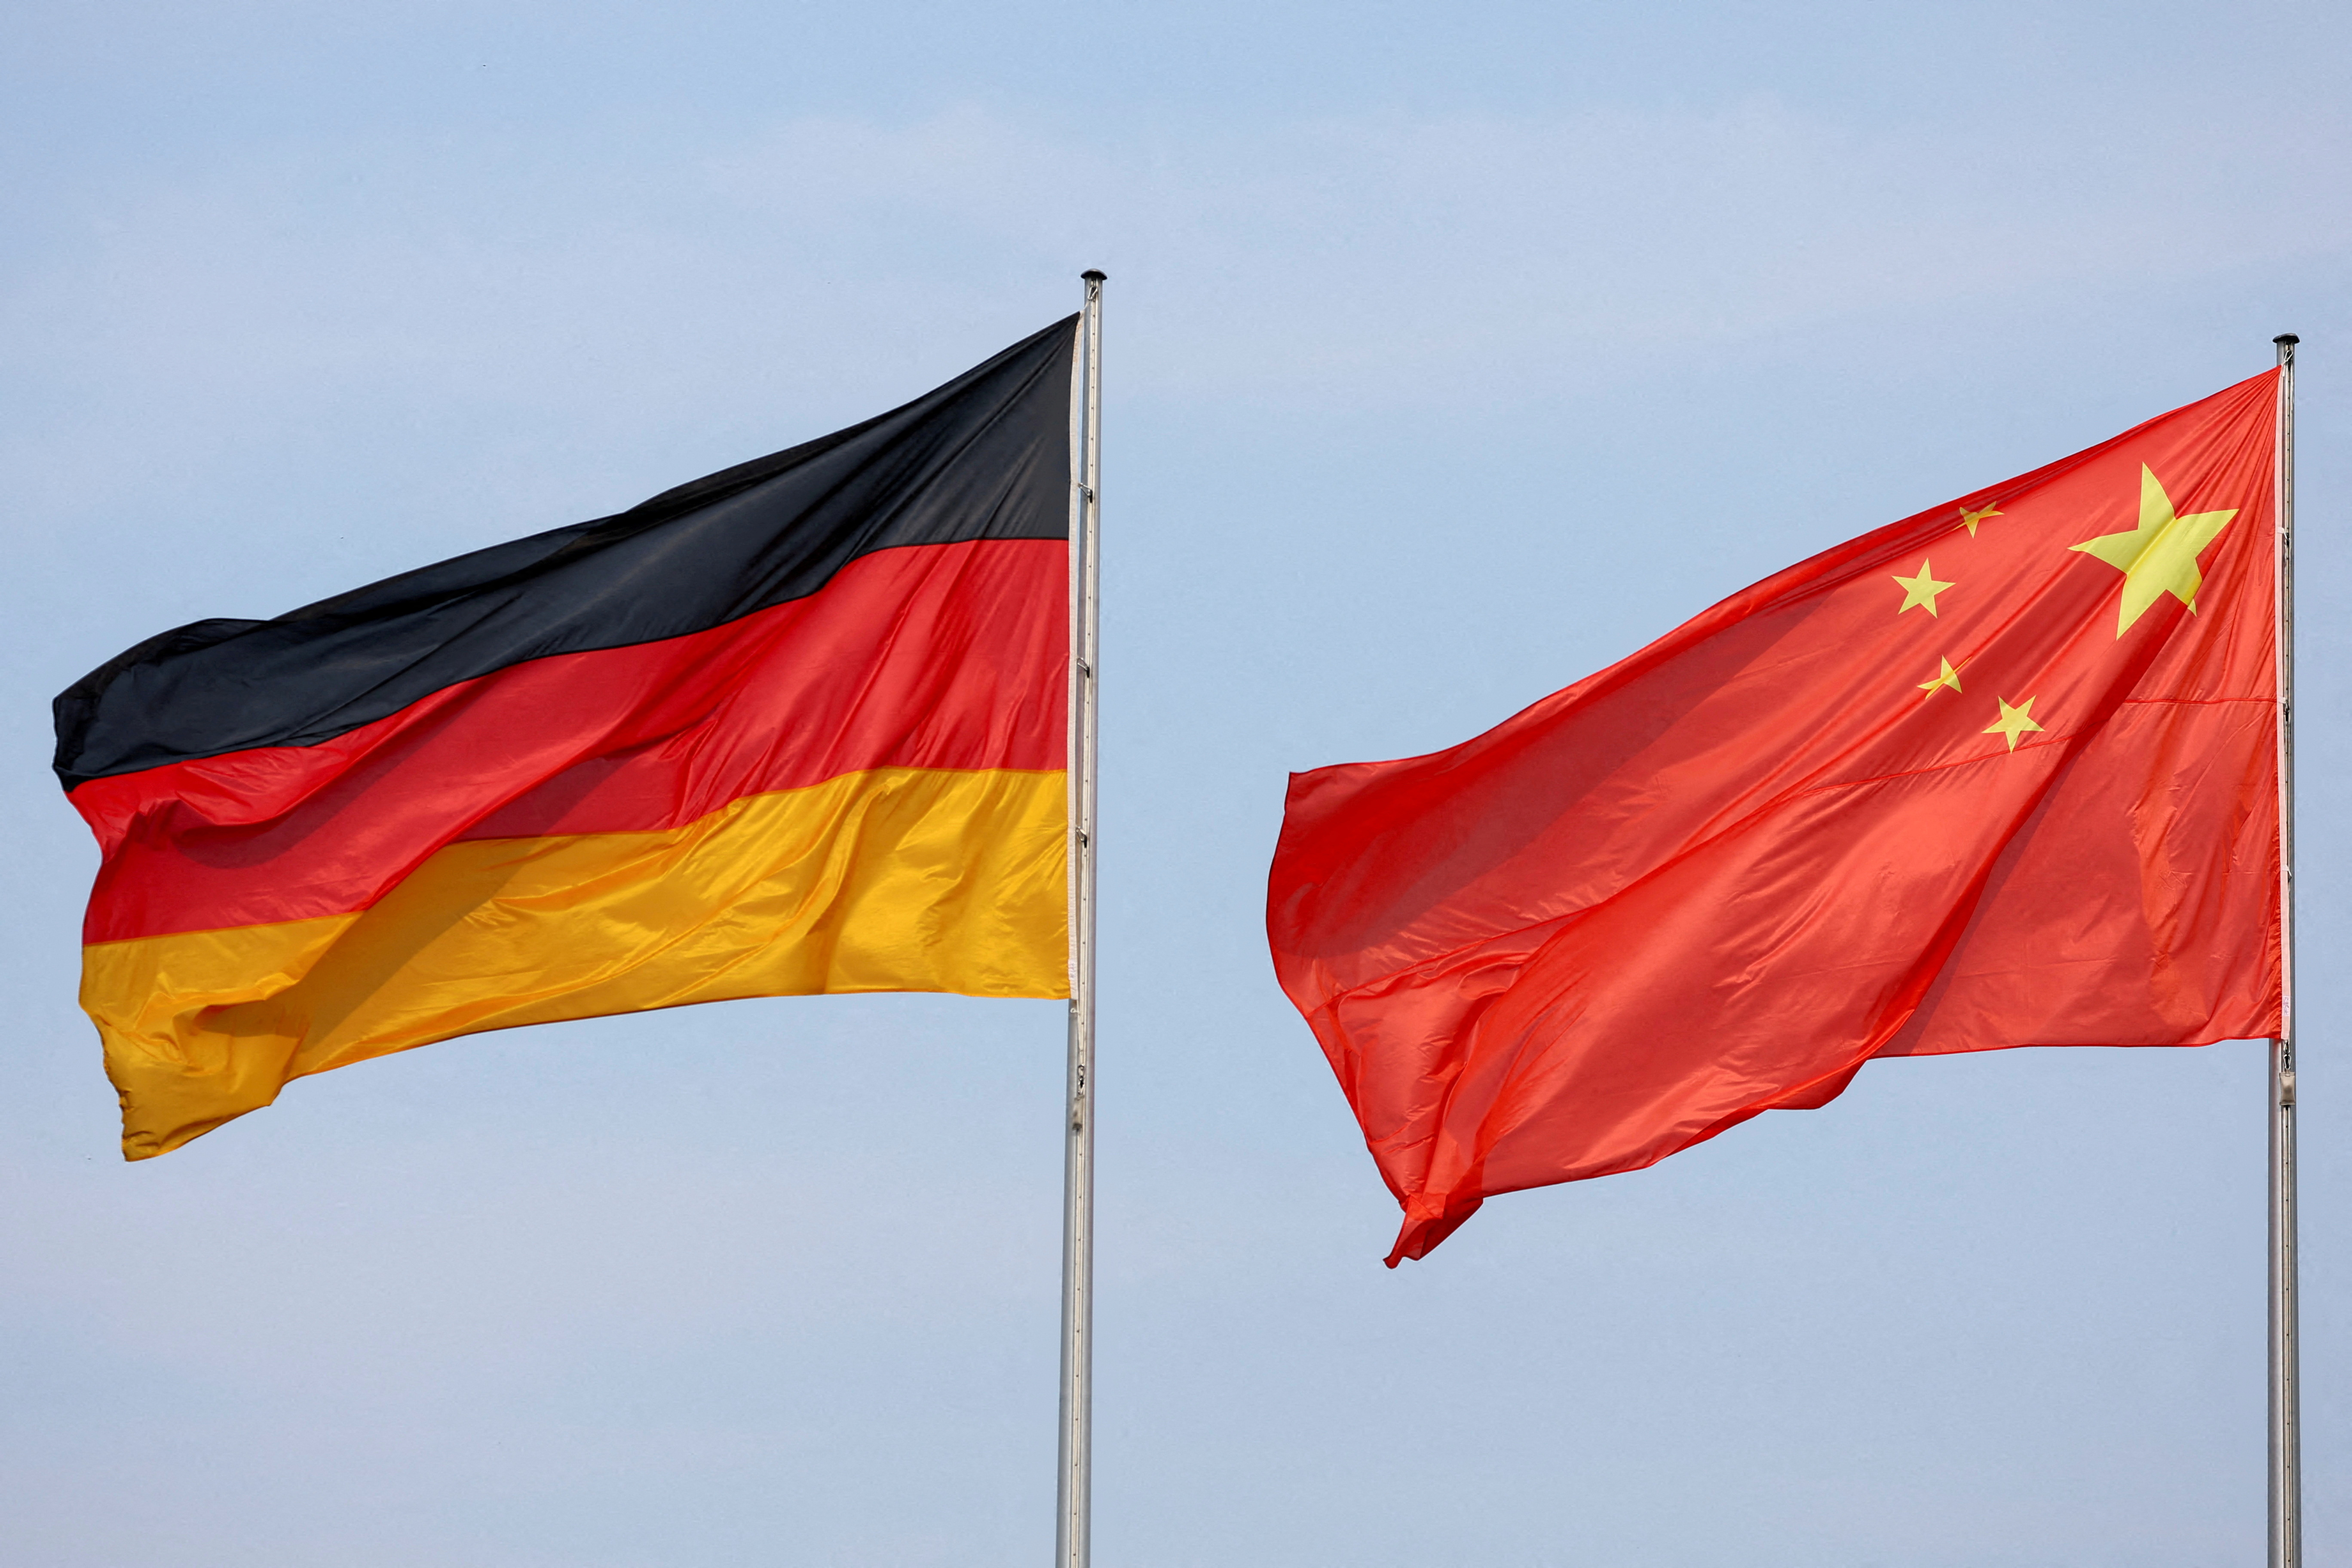 The flags of Germany and China are seen in Berlin, Germany